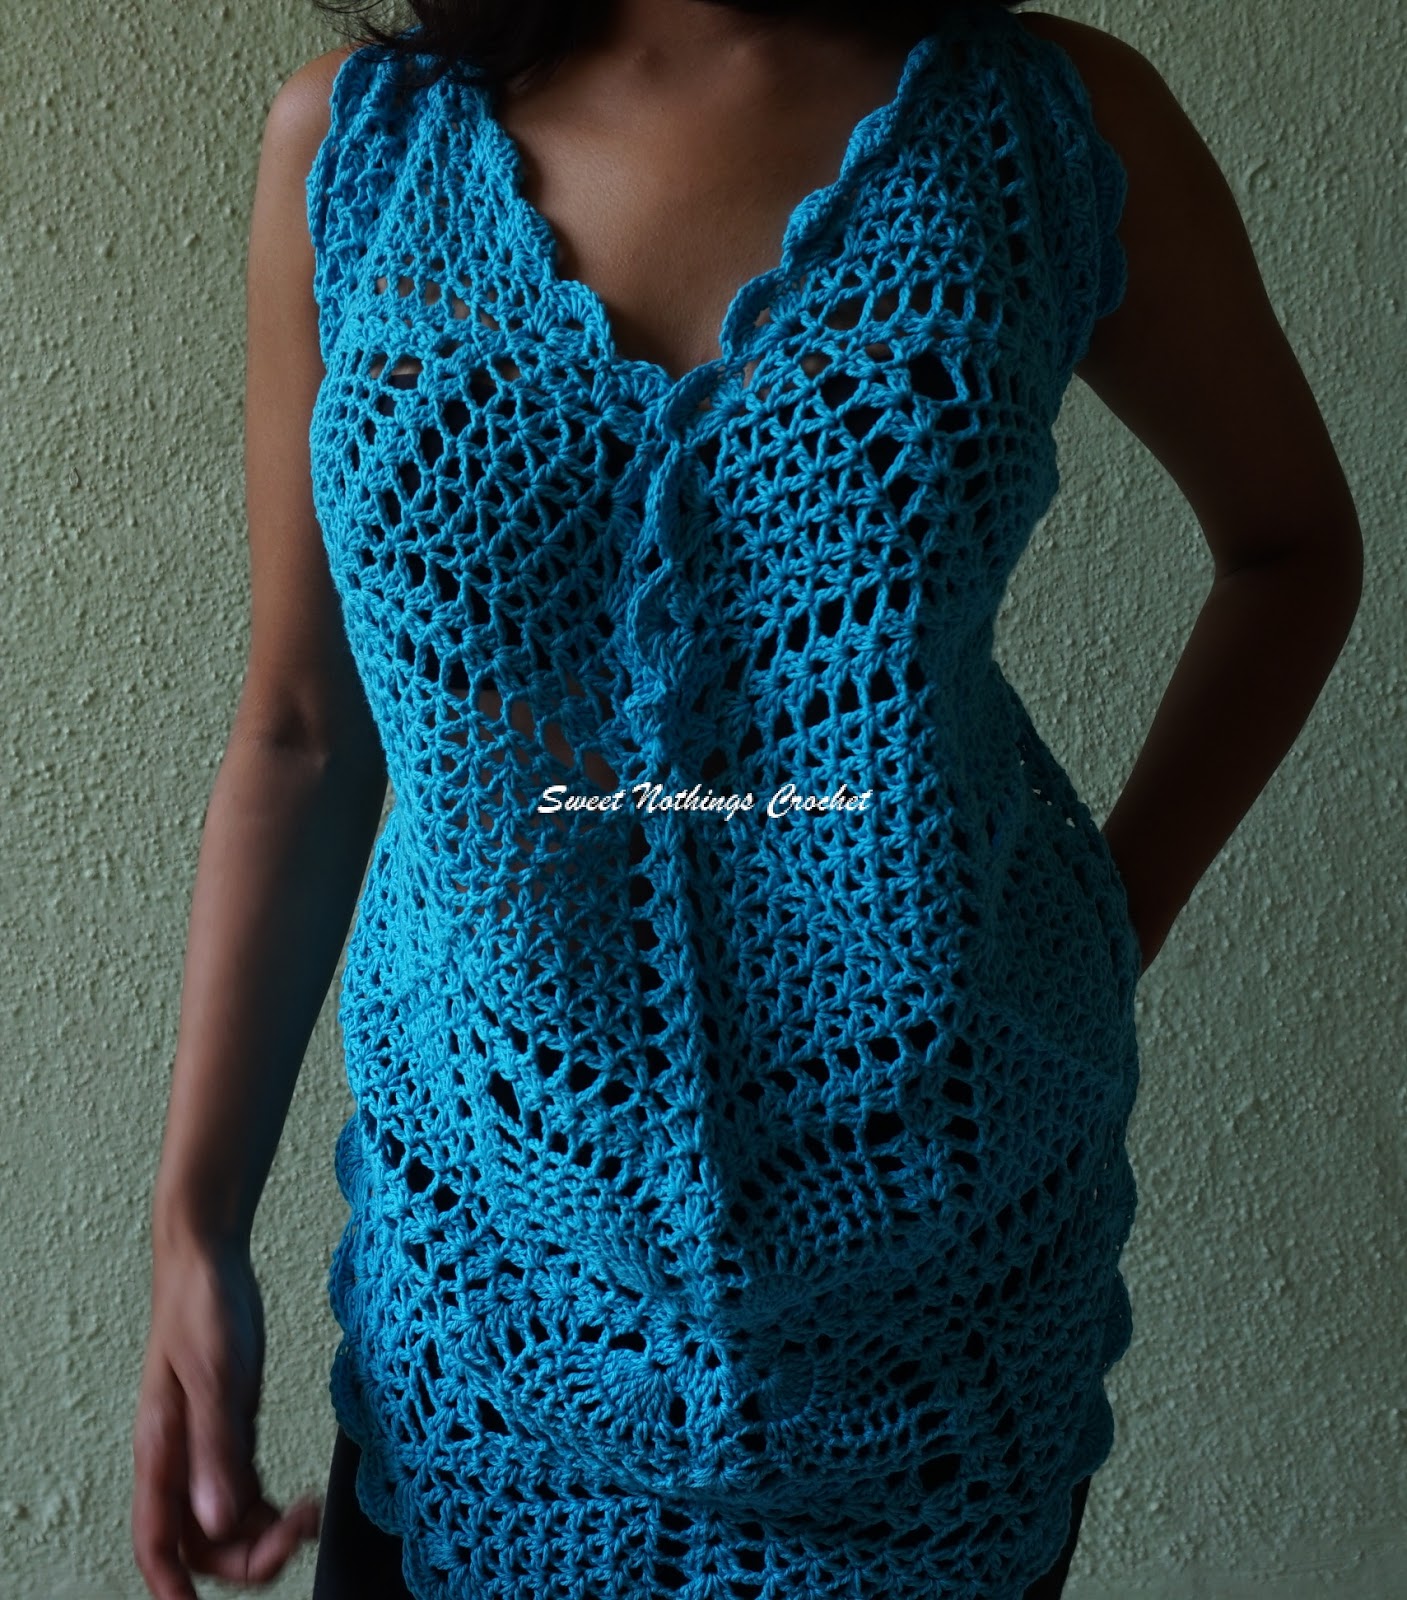 Crochet Tutorial - 'Iced Blue Lace' GRANNY SQUARE - Part 1 of 2